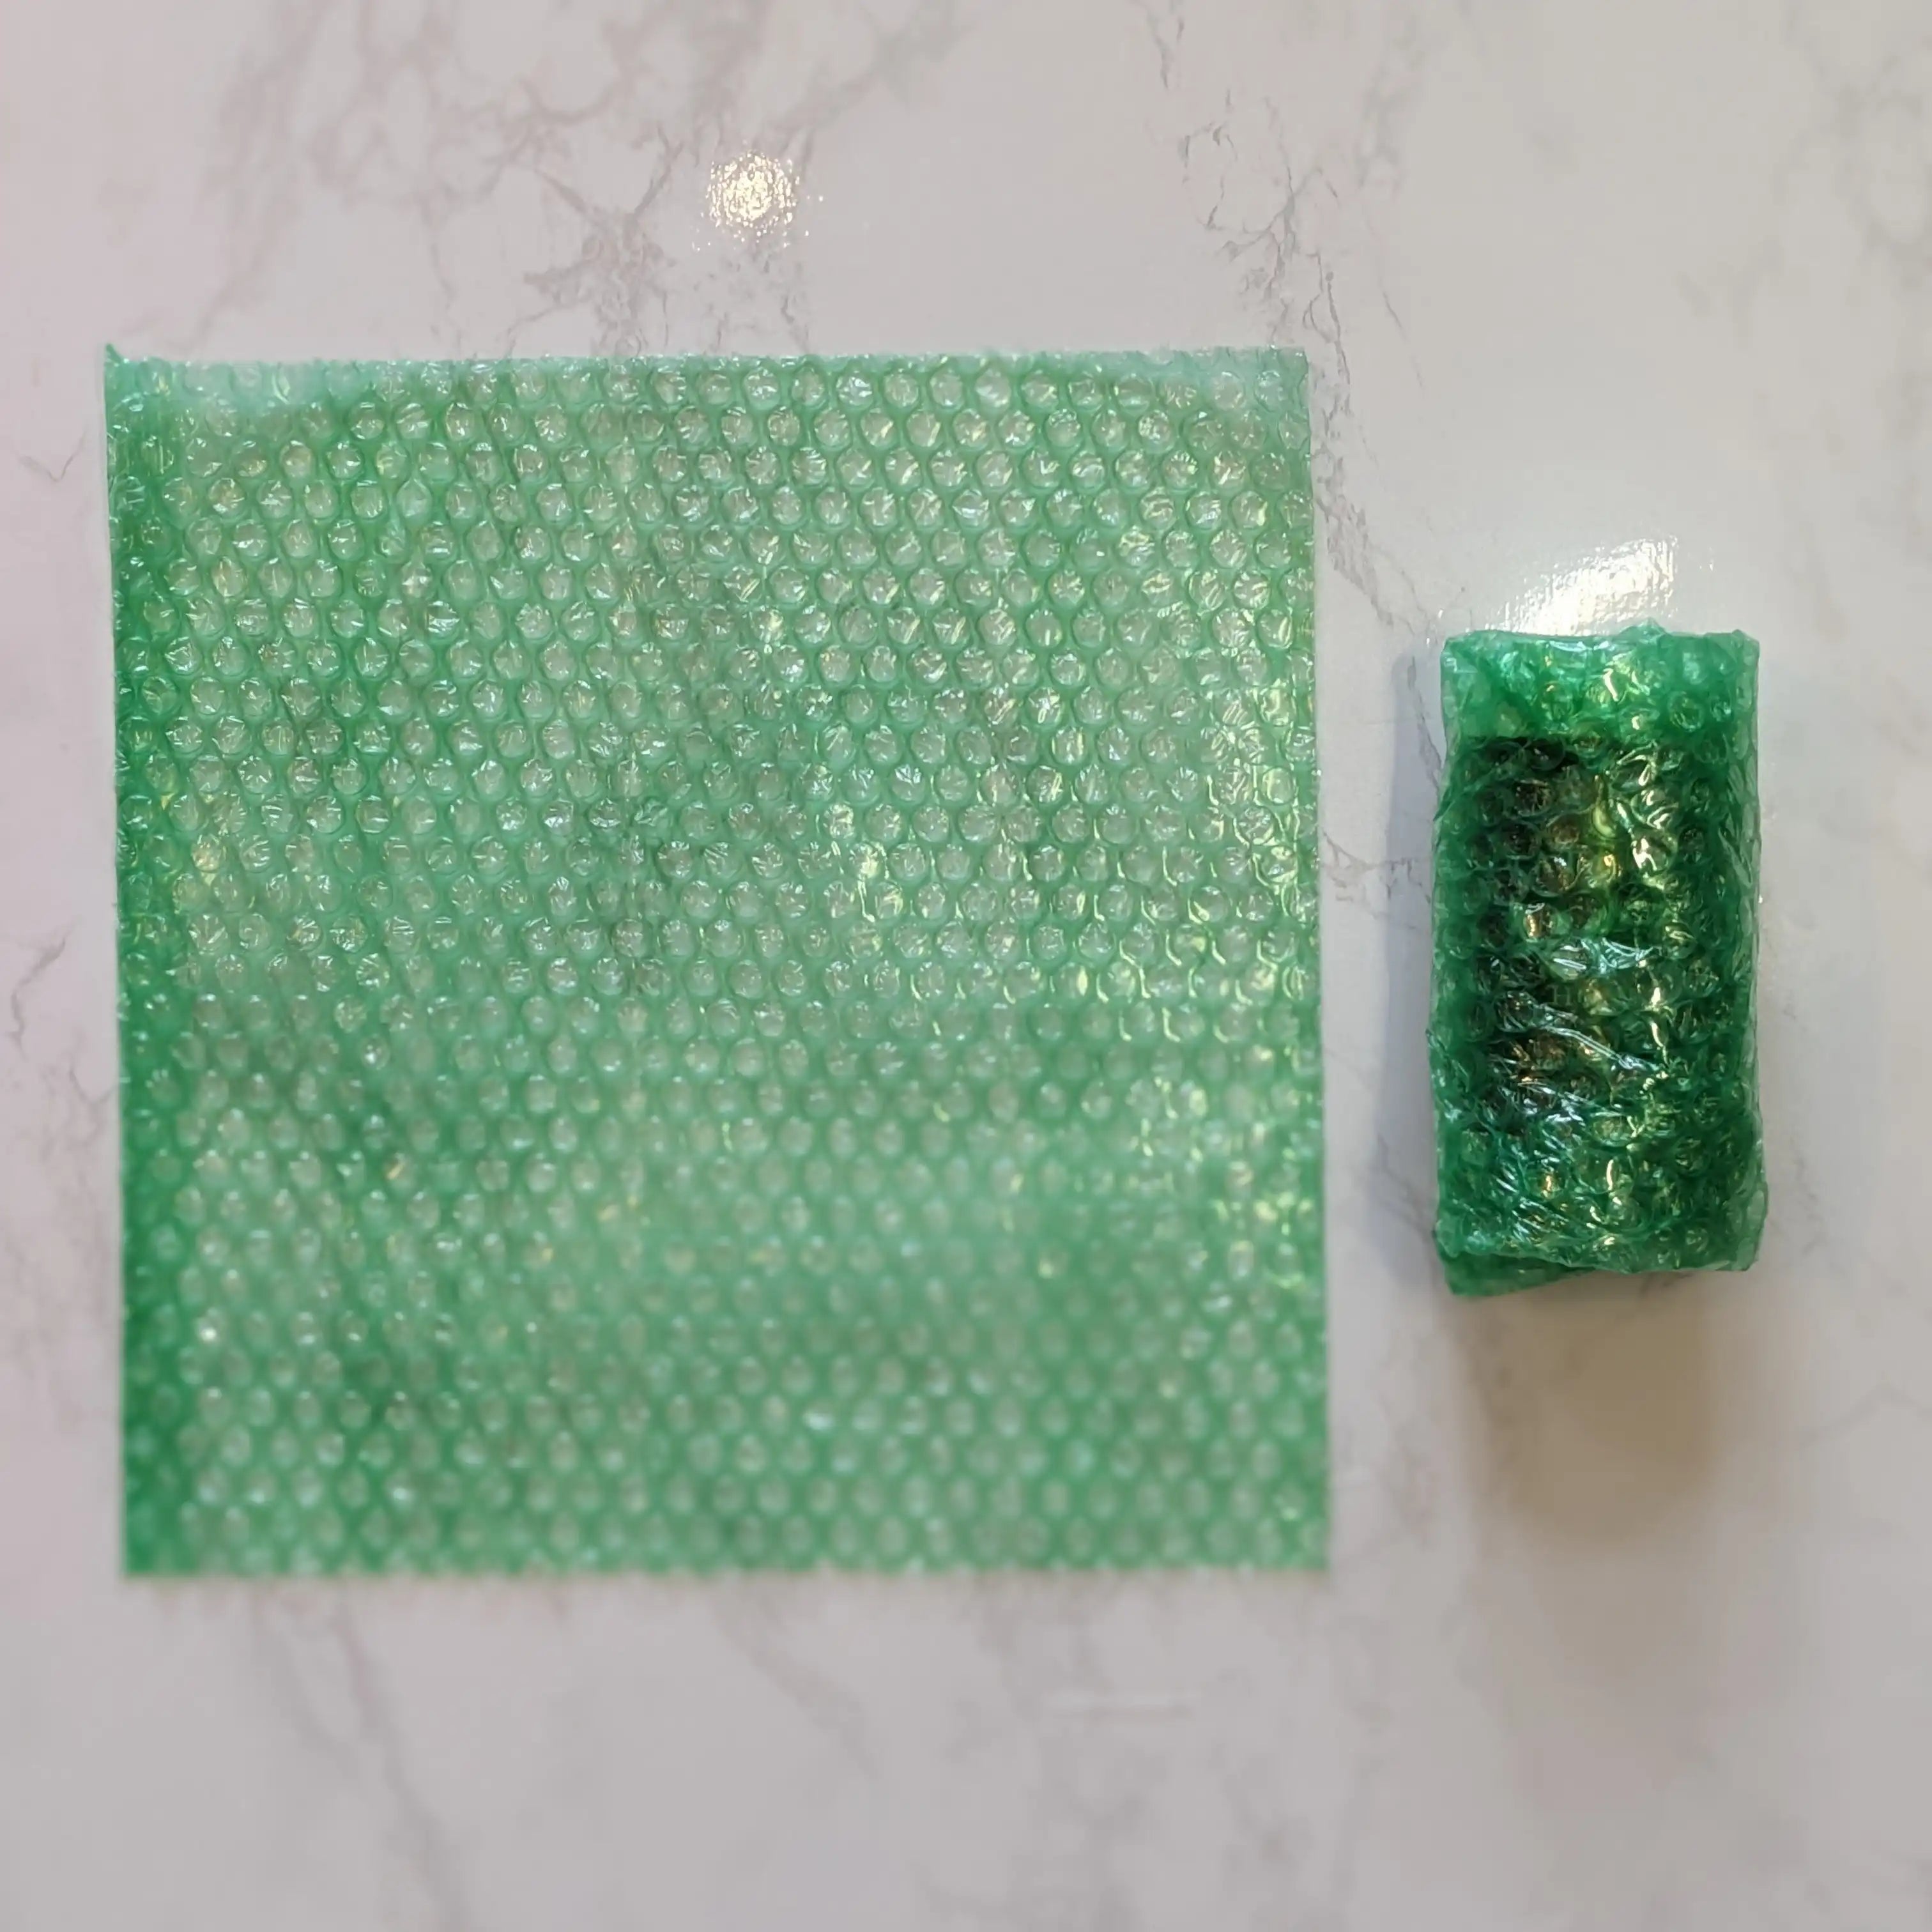 Square of recycled bubble wrap next to honey jar wrapped in recycled bubble wrap